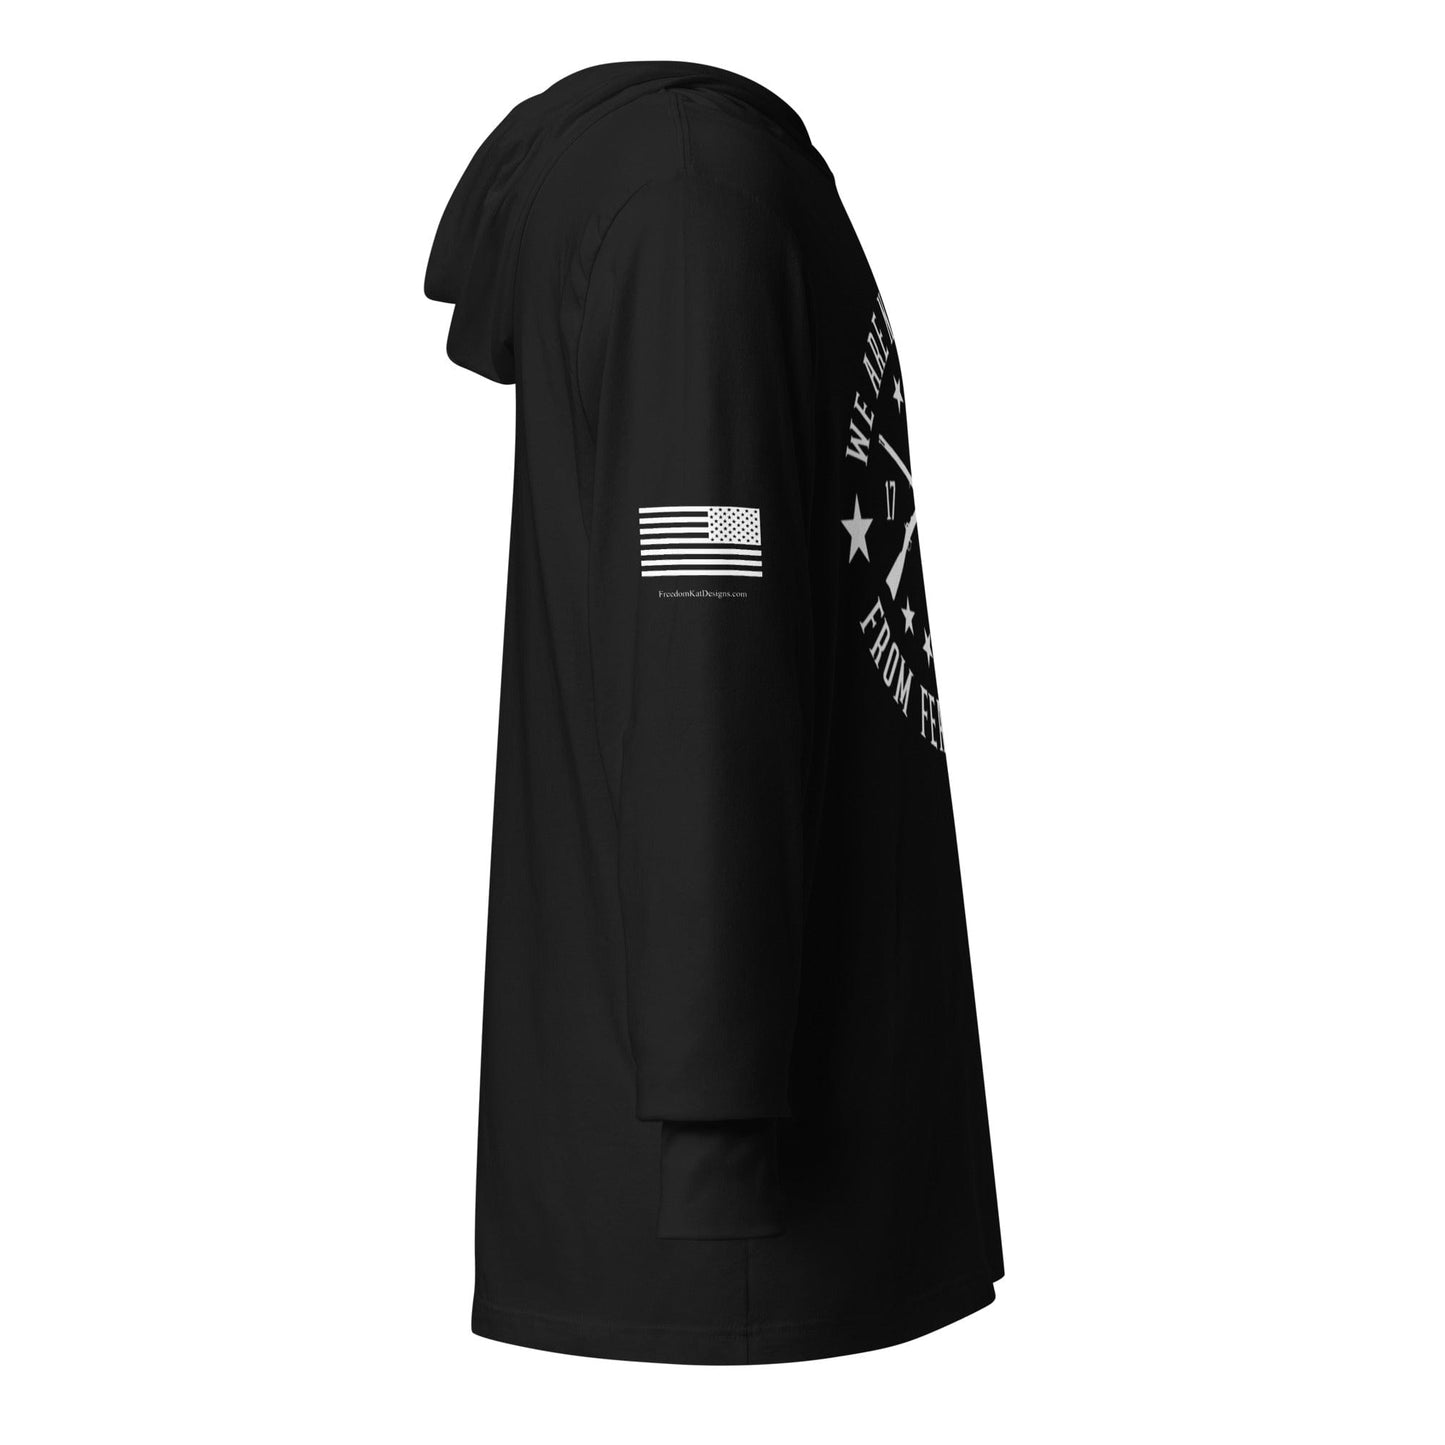 FreedomKat Designs, LLC We Are Not Descended Hooded long-sleeve tee